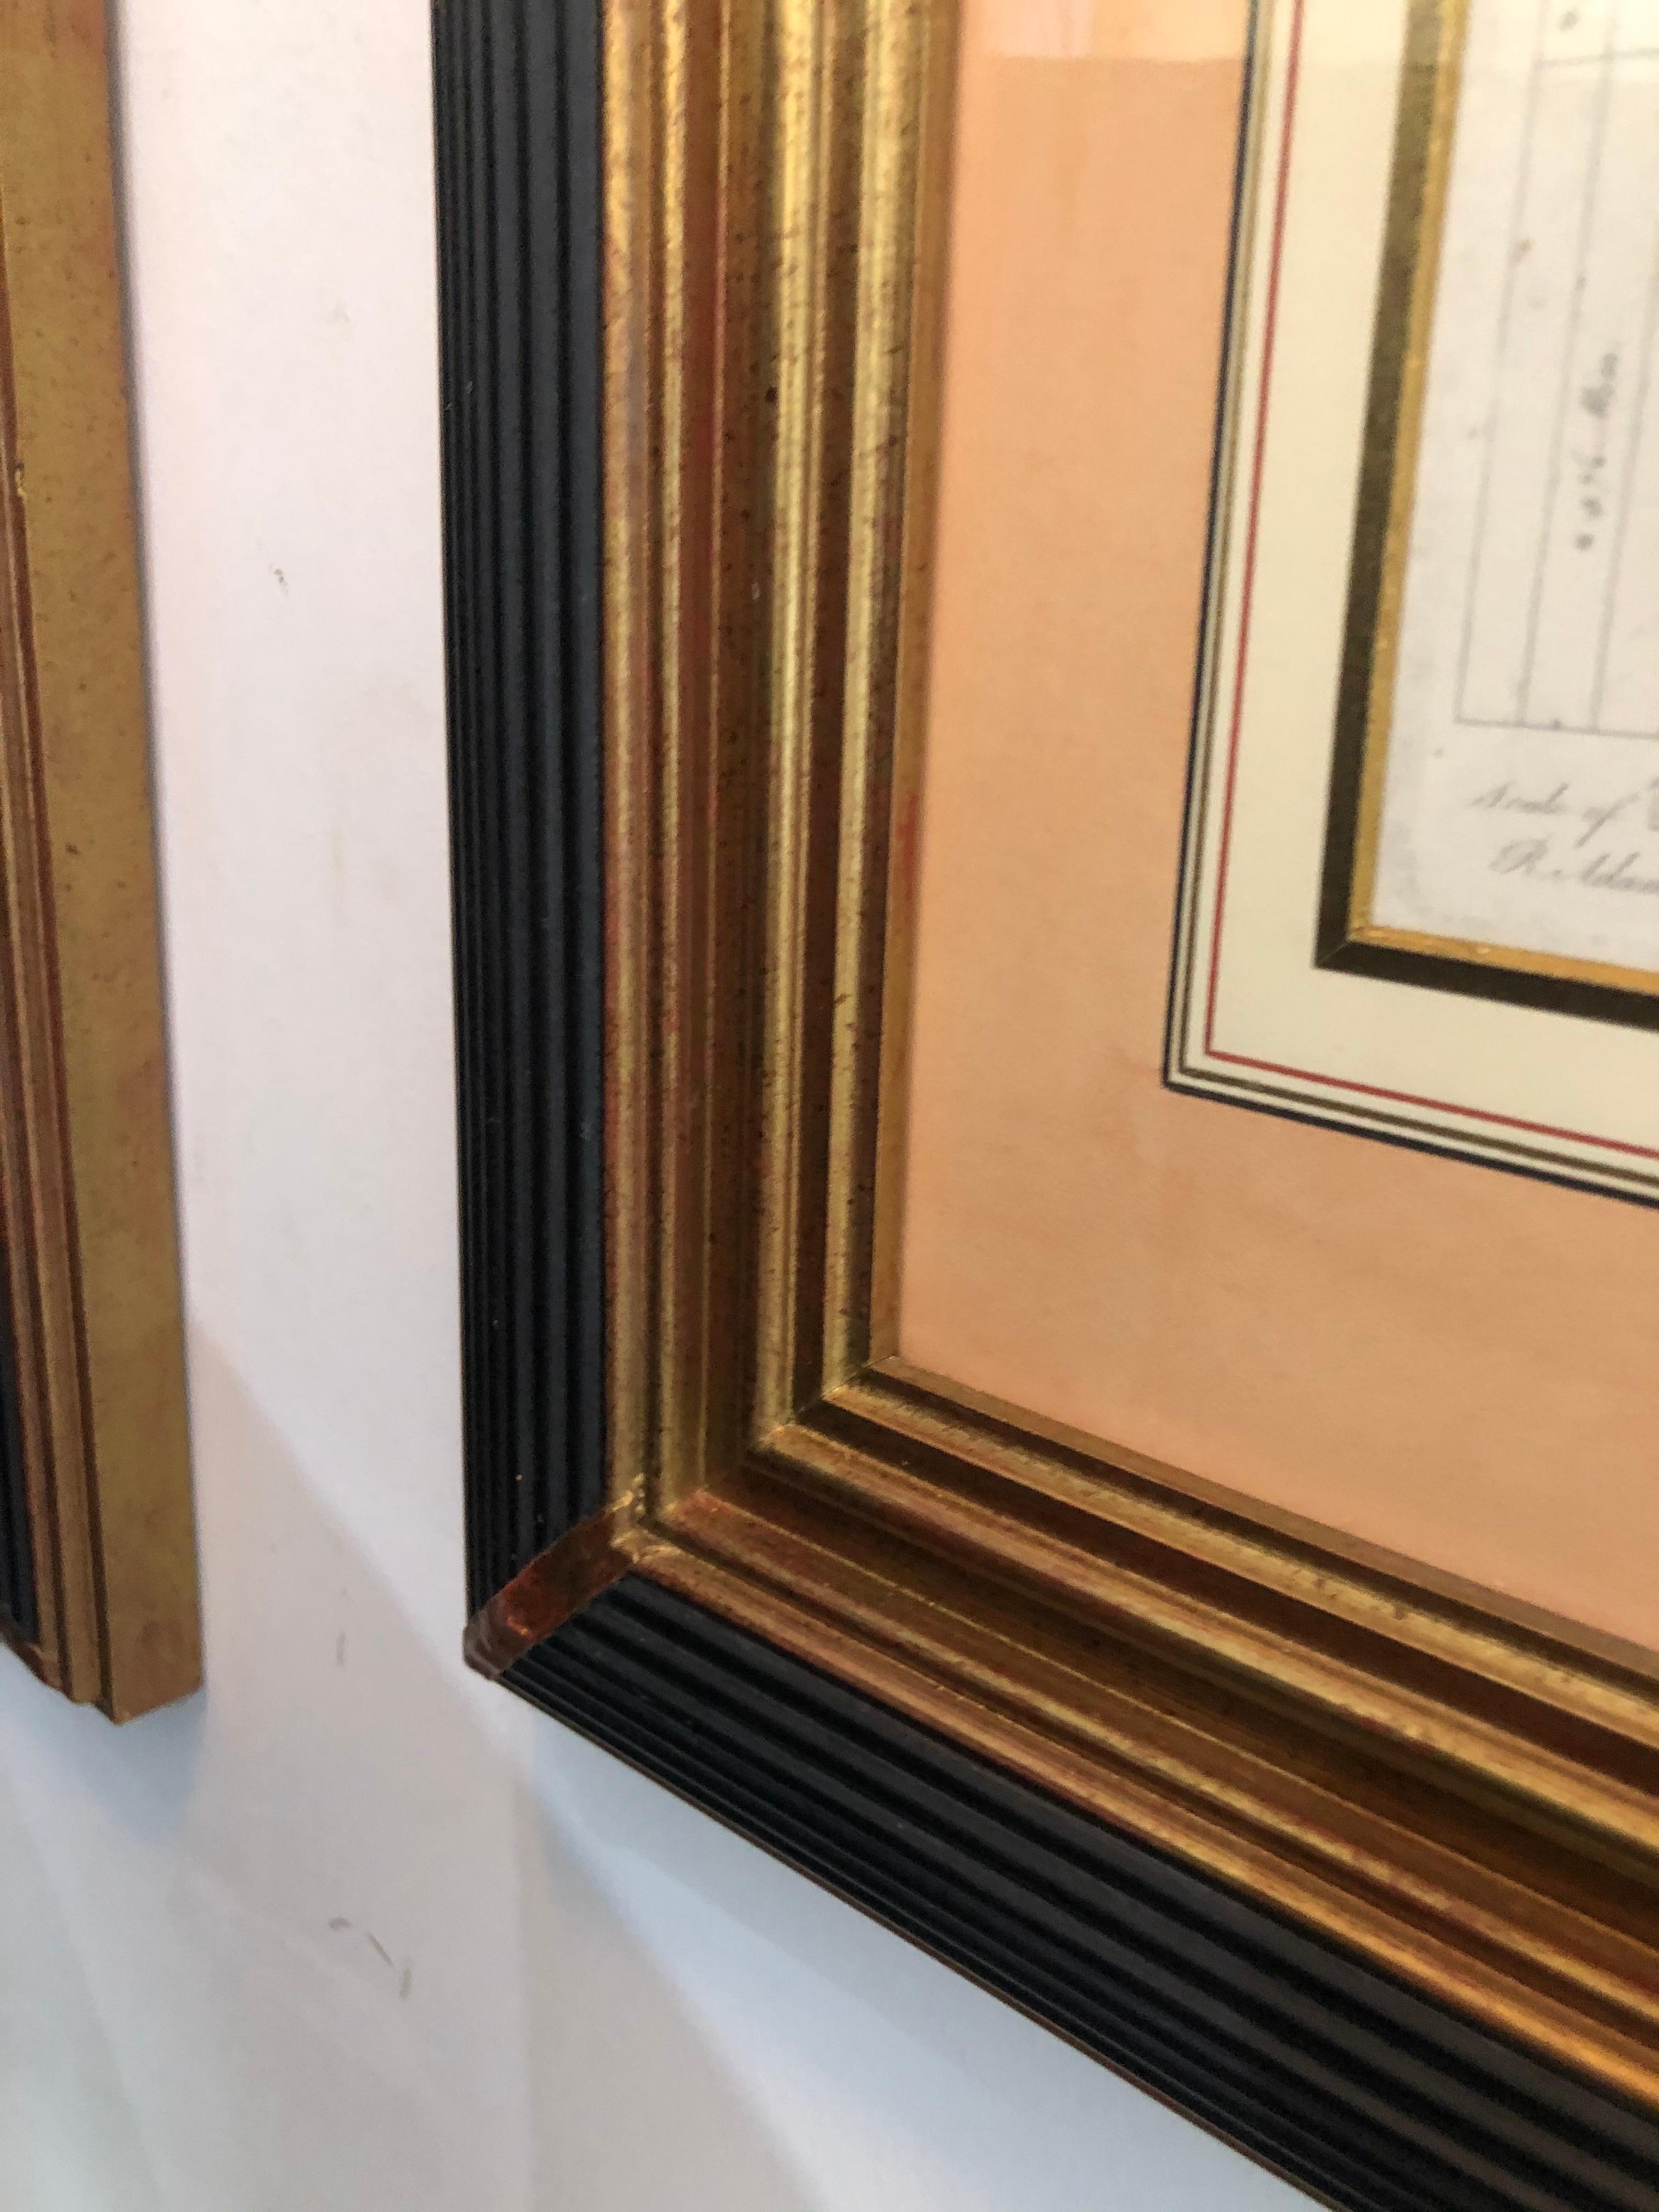 Set of Three Neoclasssical Architectural Prints For Sale 6